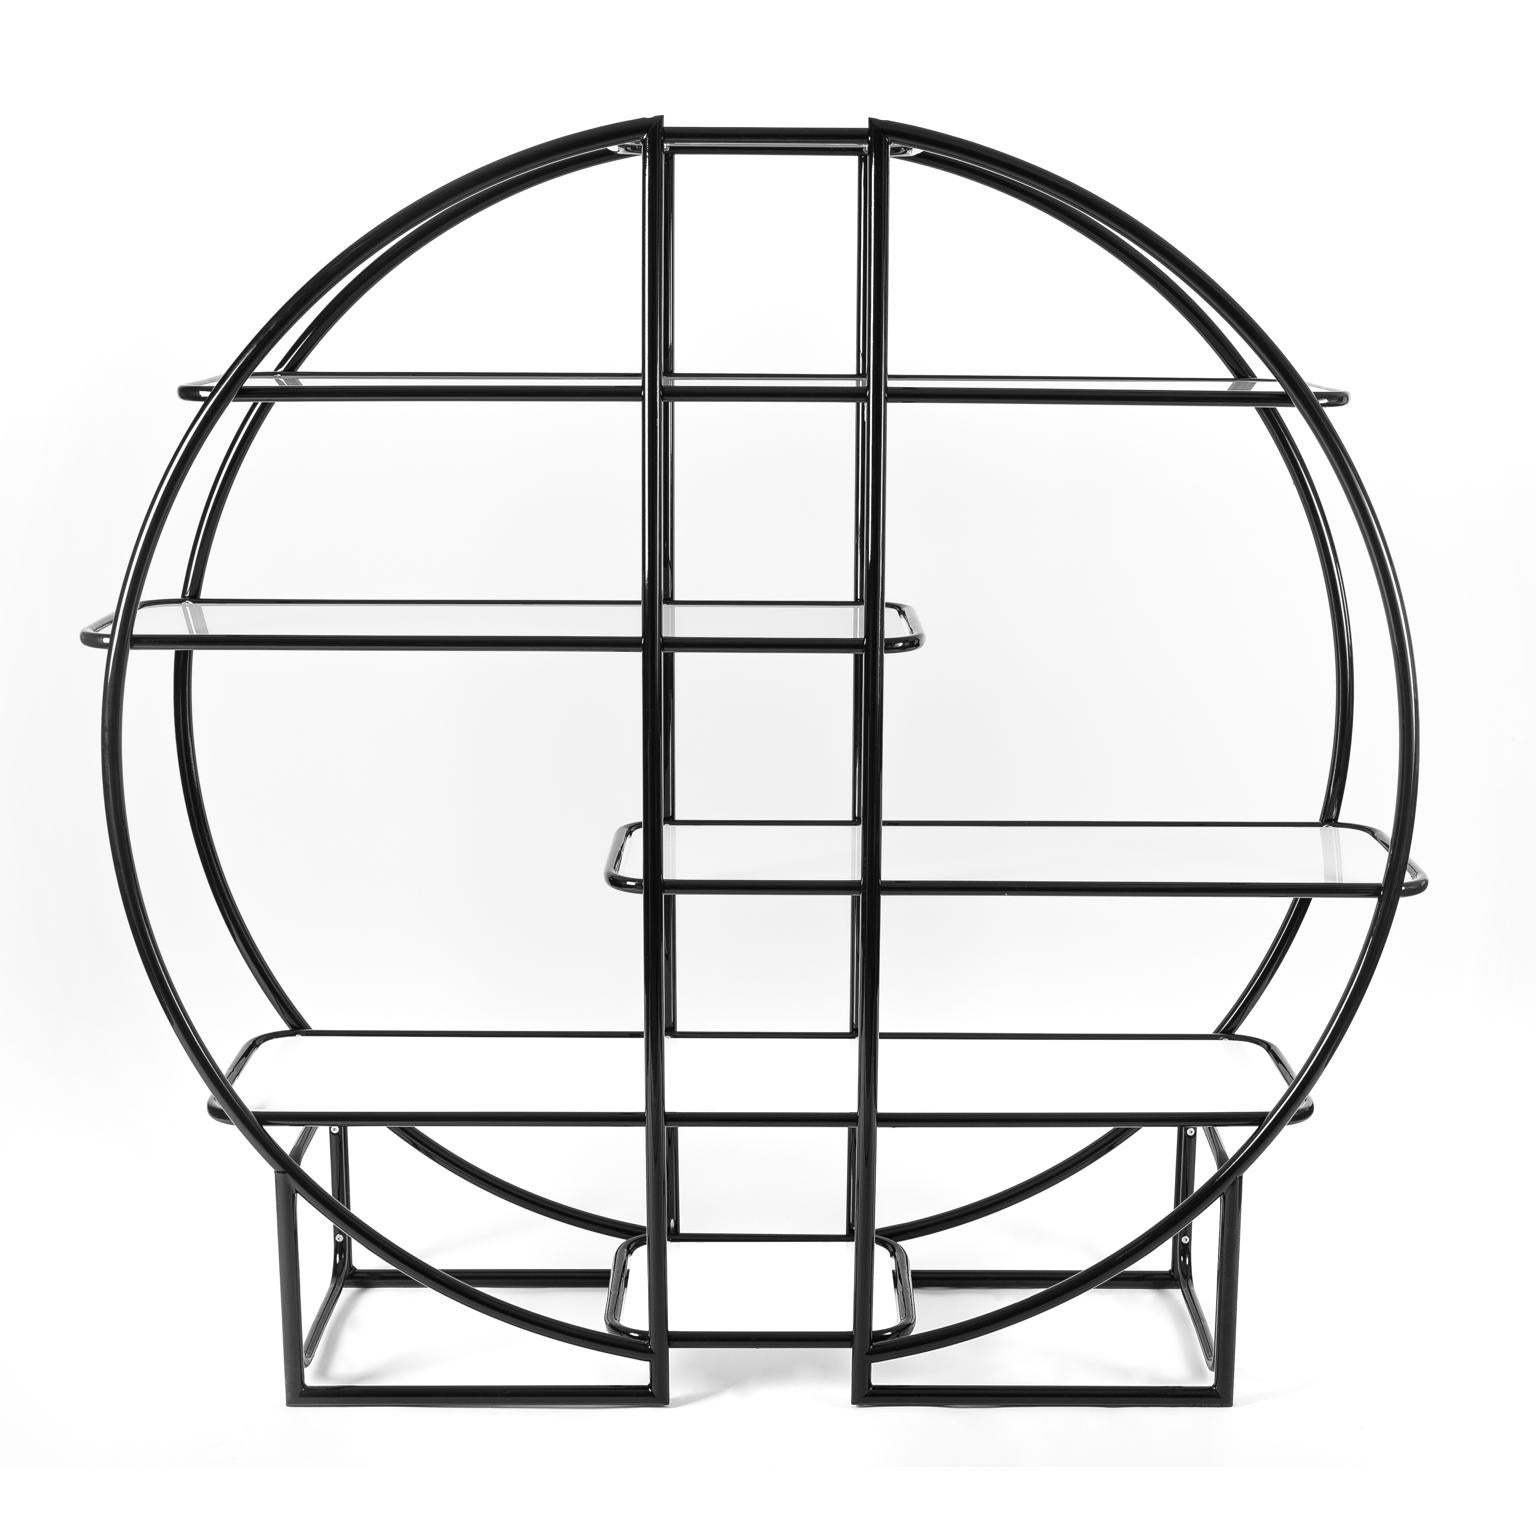 Amazing round étagère or vitrine or book case in the manner of Milo Baughman with six various sized glass shelves. This piece can be put against the wall but is also great to use as room divider. 

Great piece and a case example of Bauhaus, Art Deco